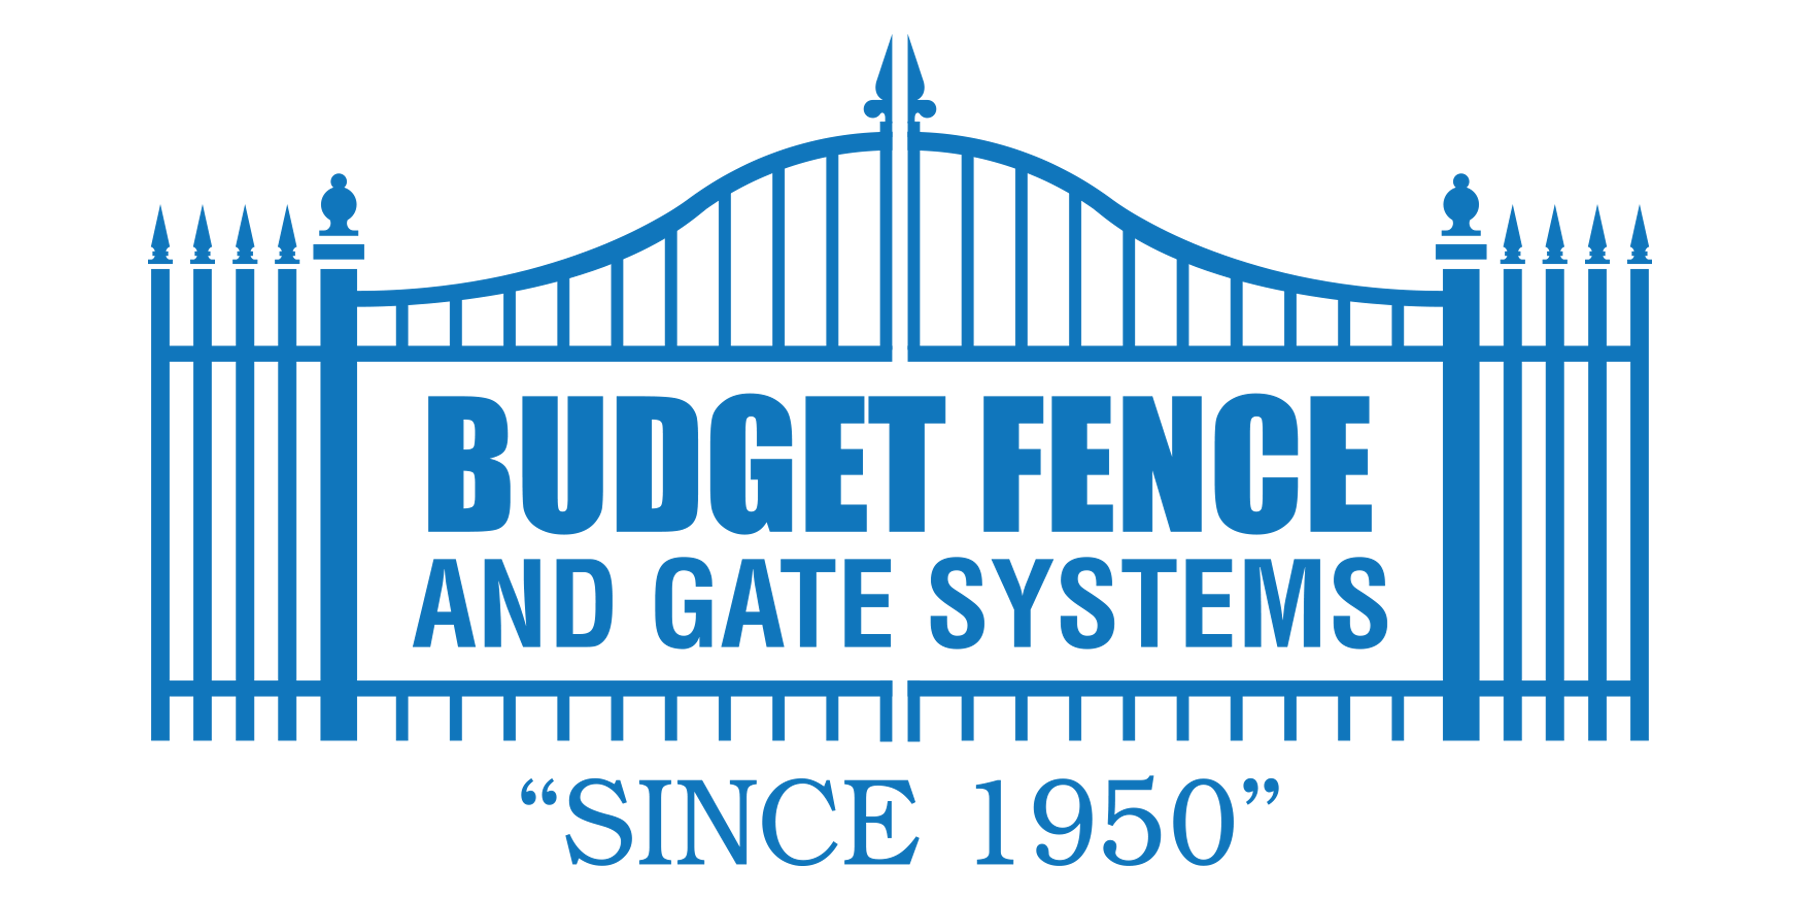 Budget Fence and Gate.